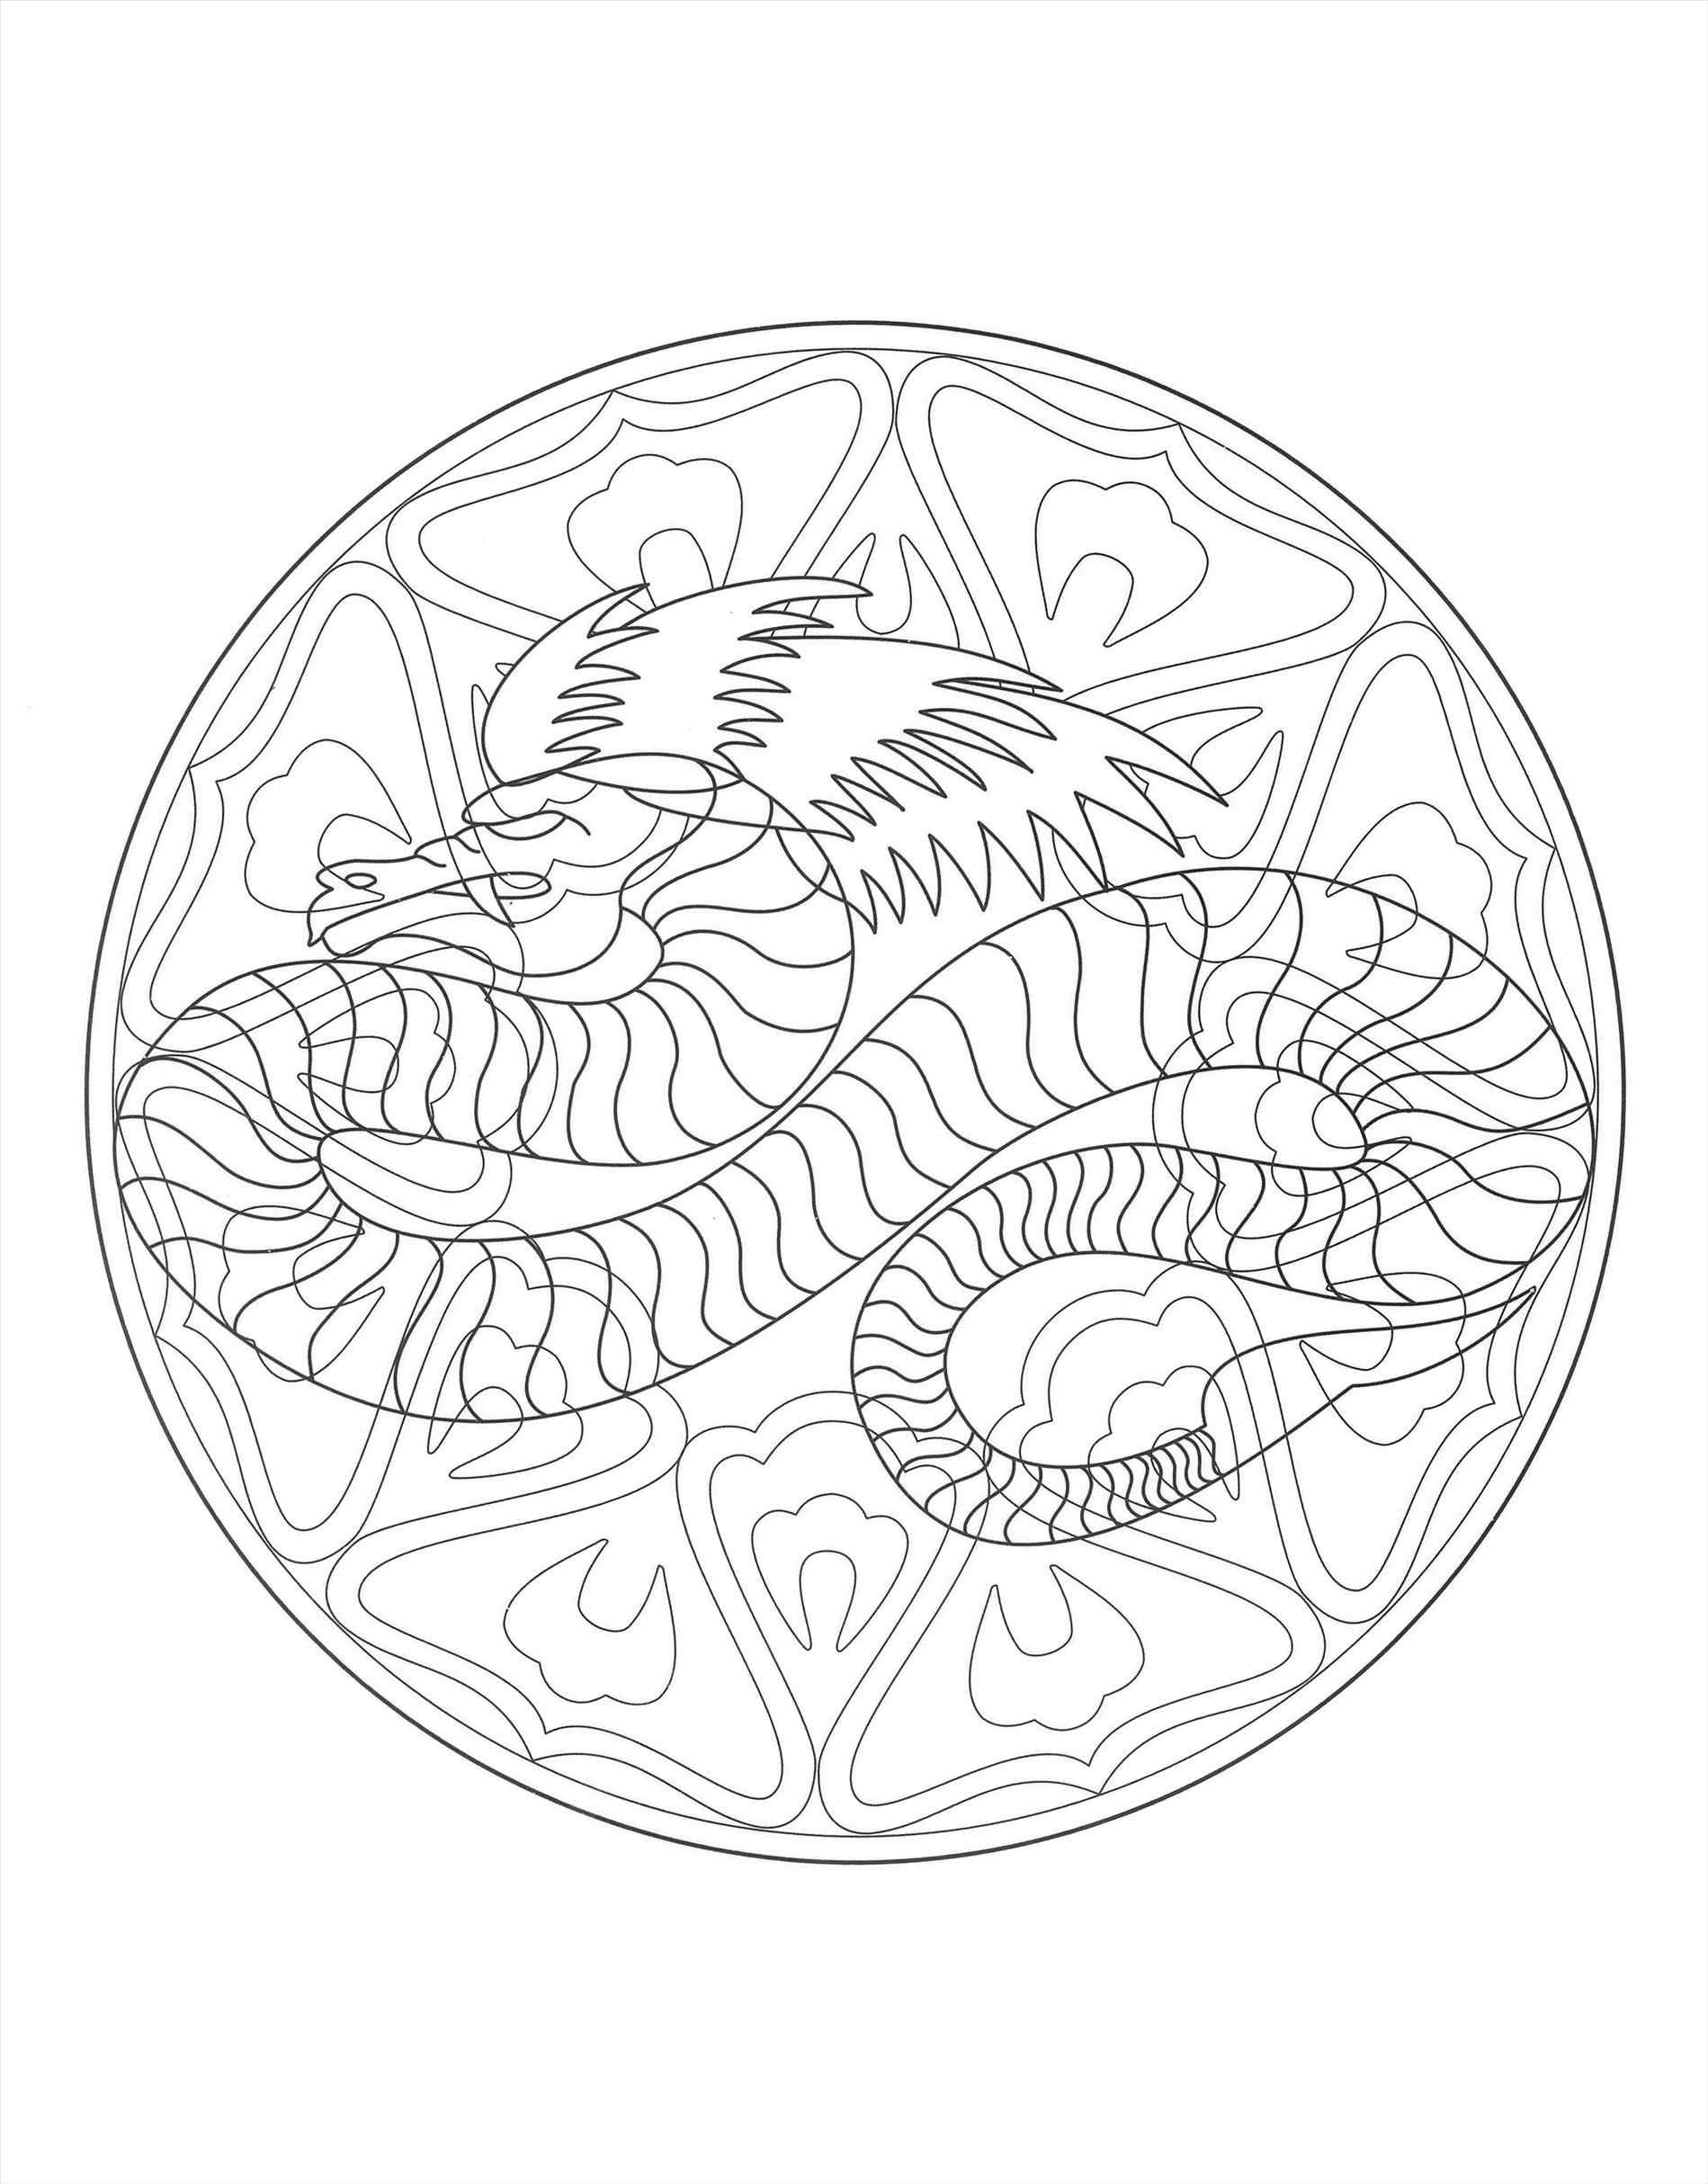 Waffle Coloring Page at GetDrawings.com | Free for personal use Waffle